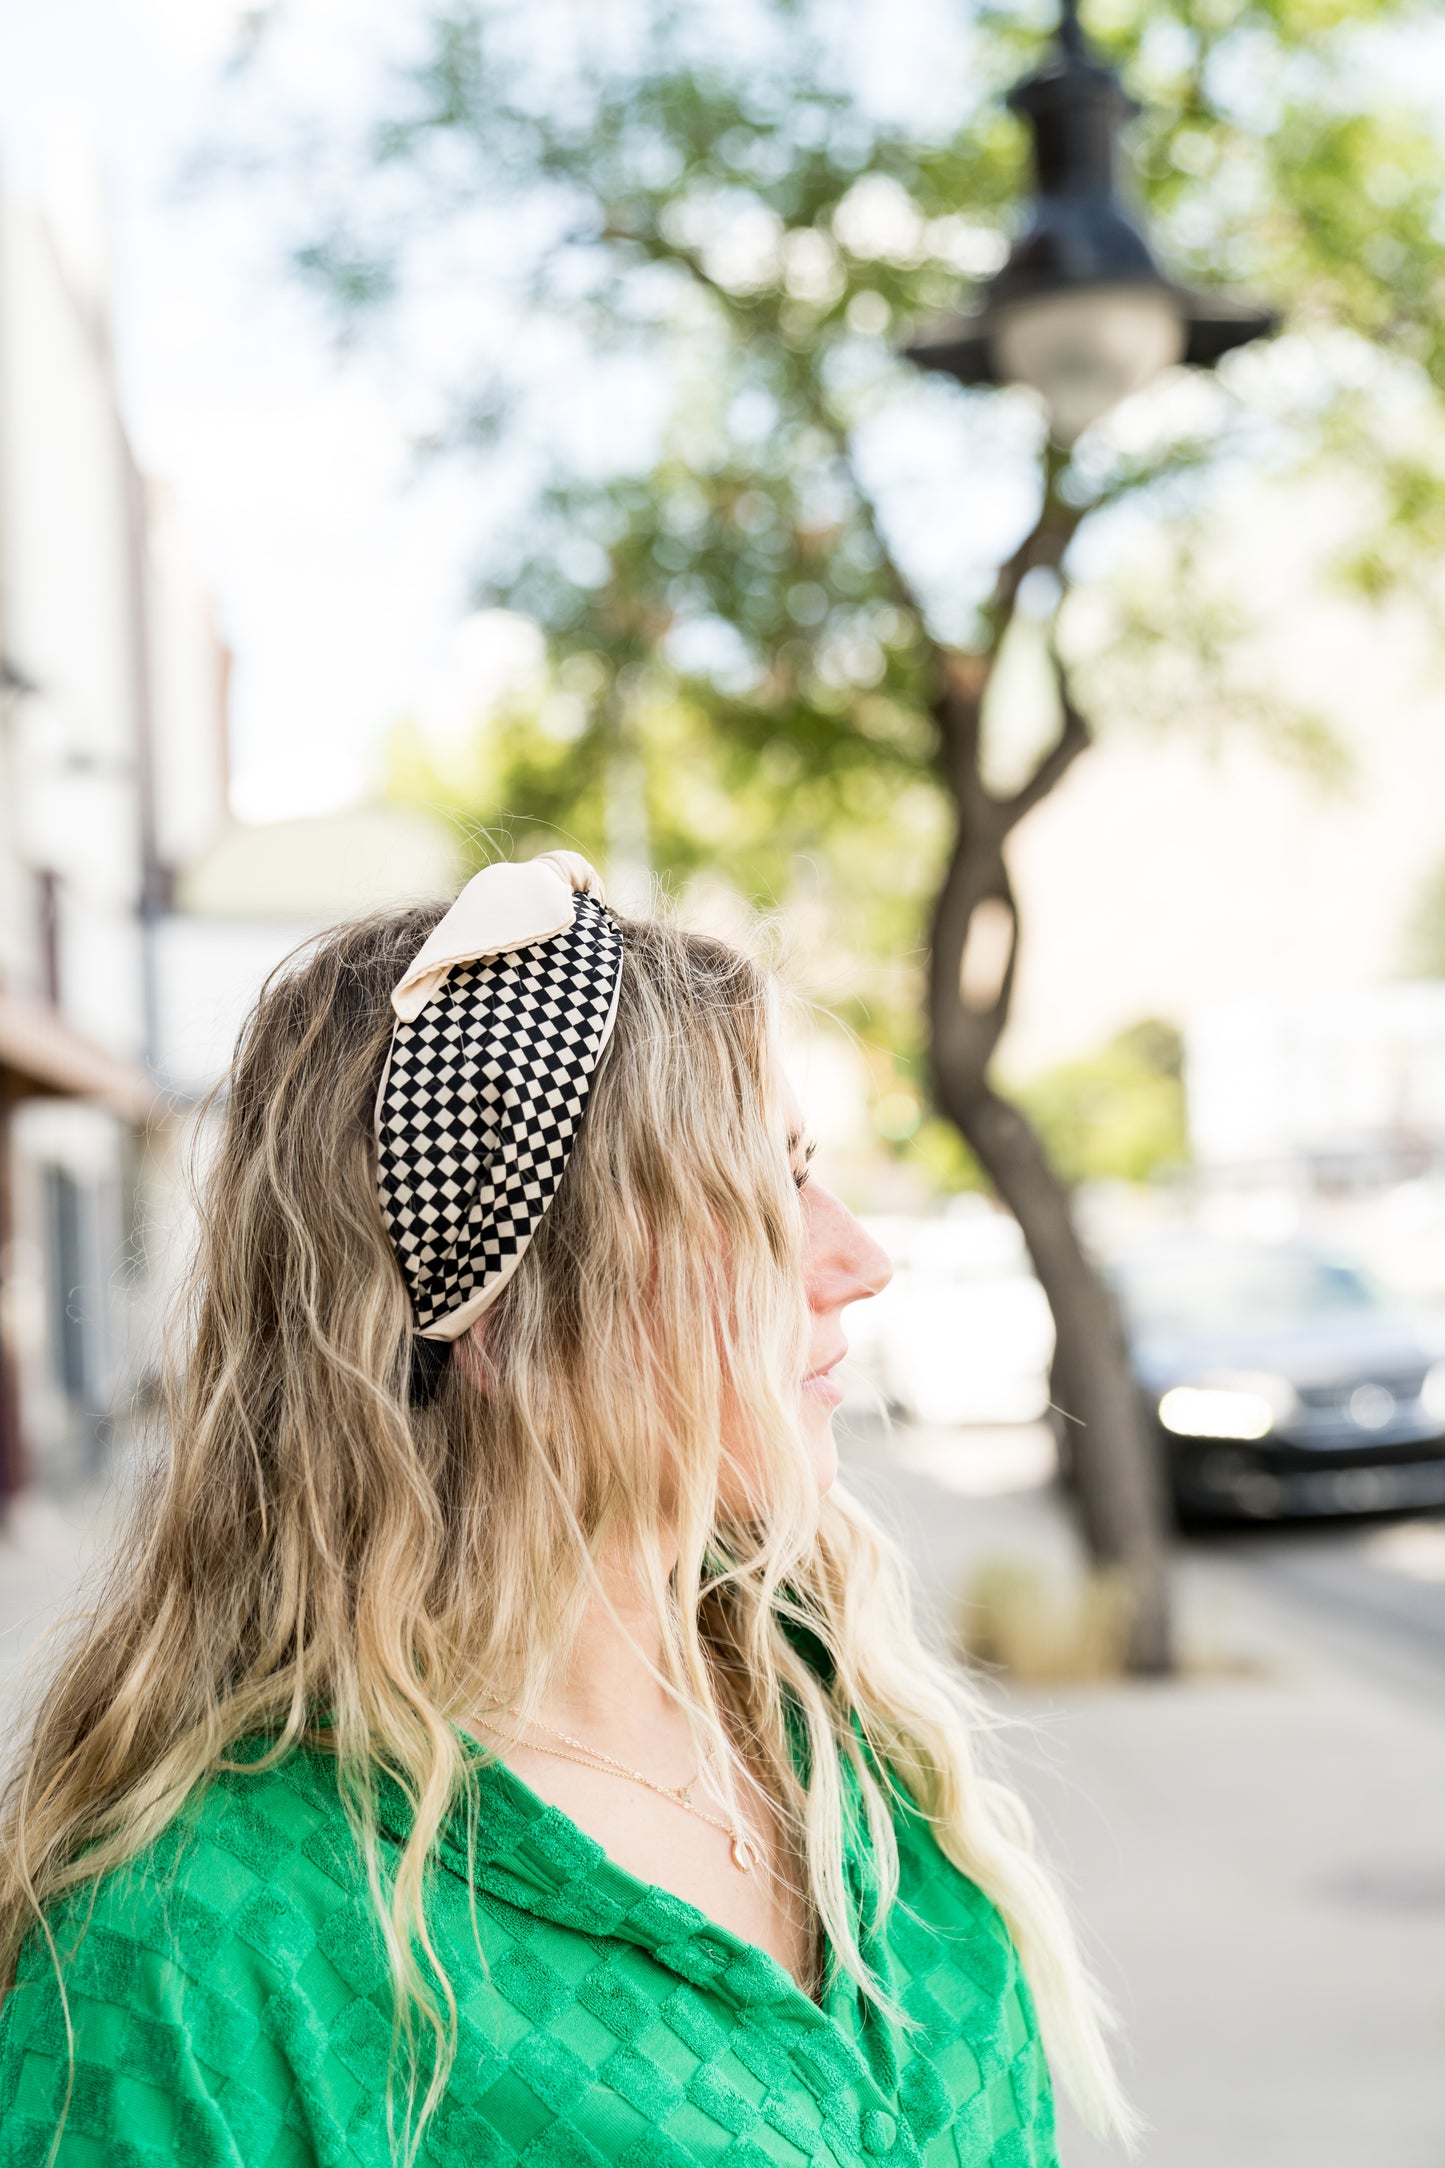 Delicate Bow Checkered Head-Band